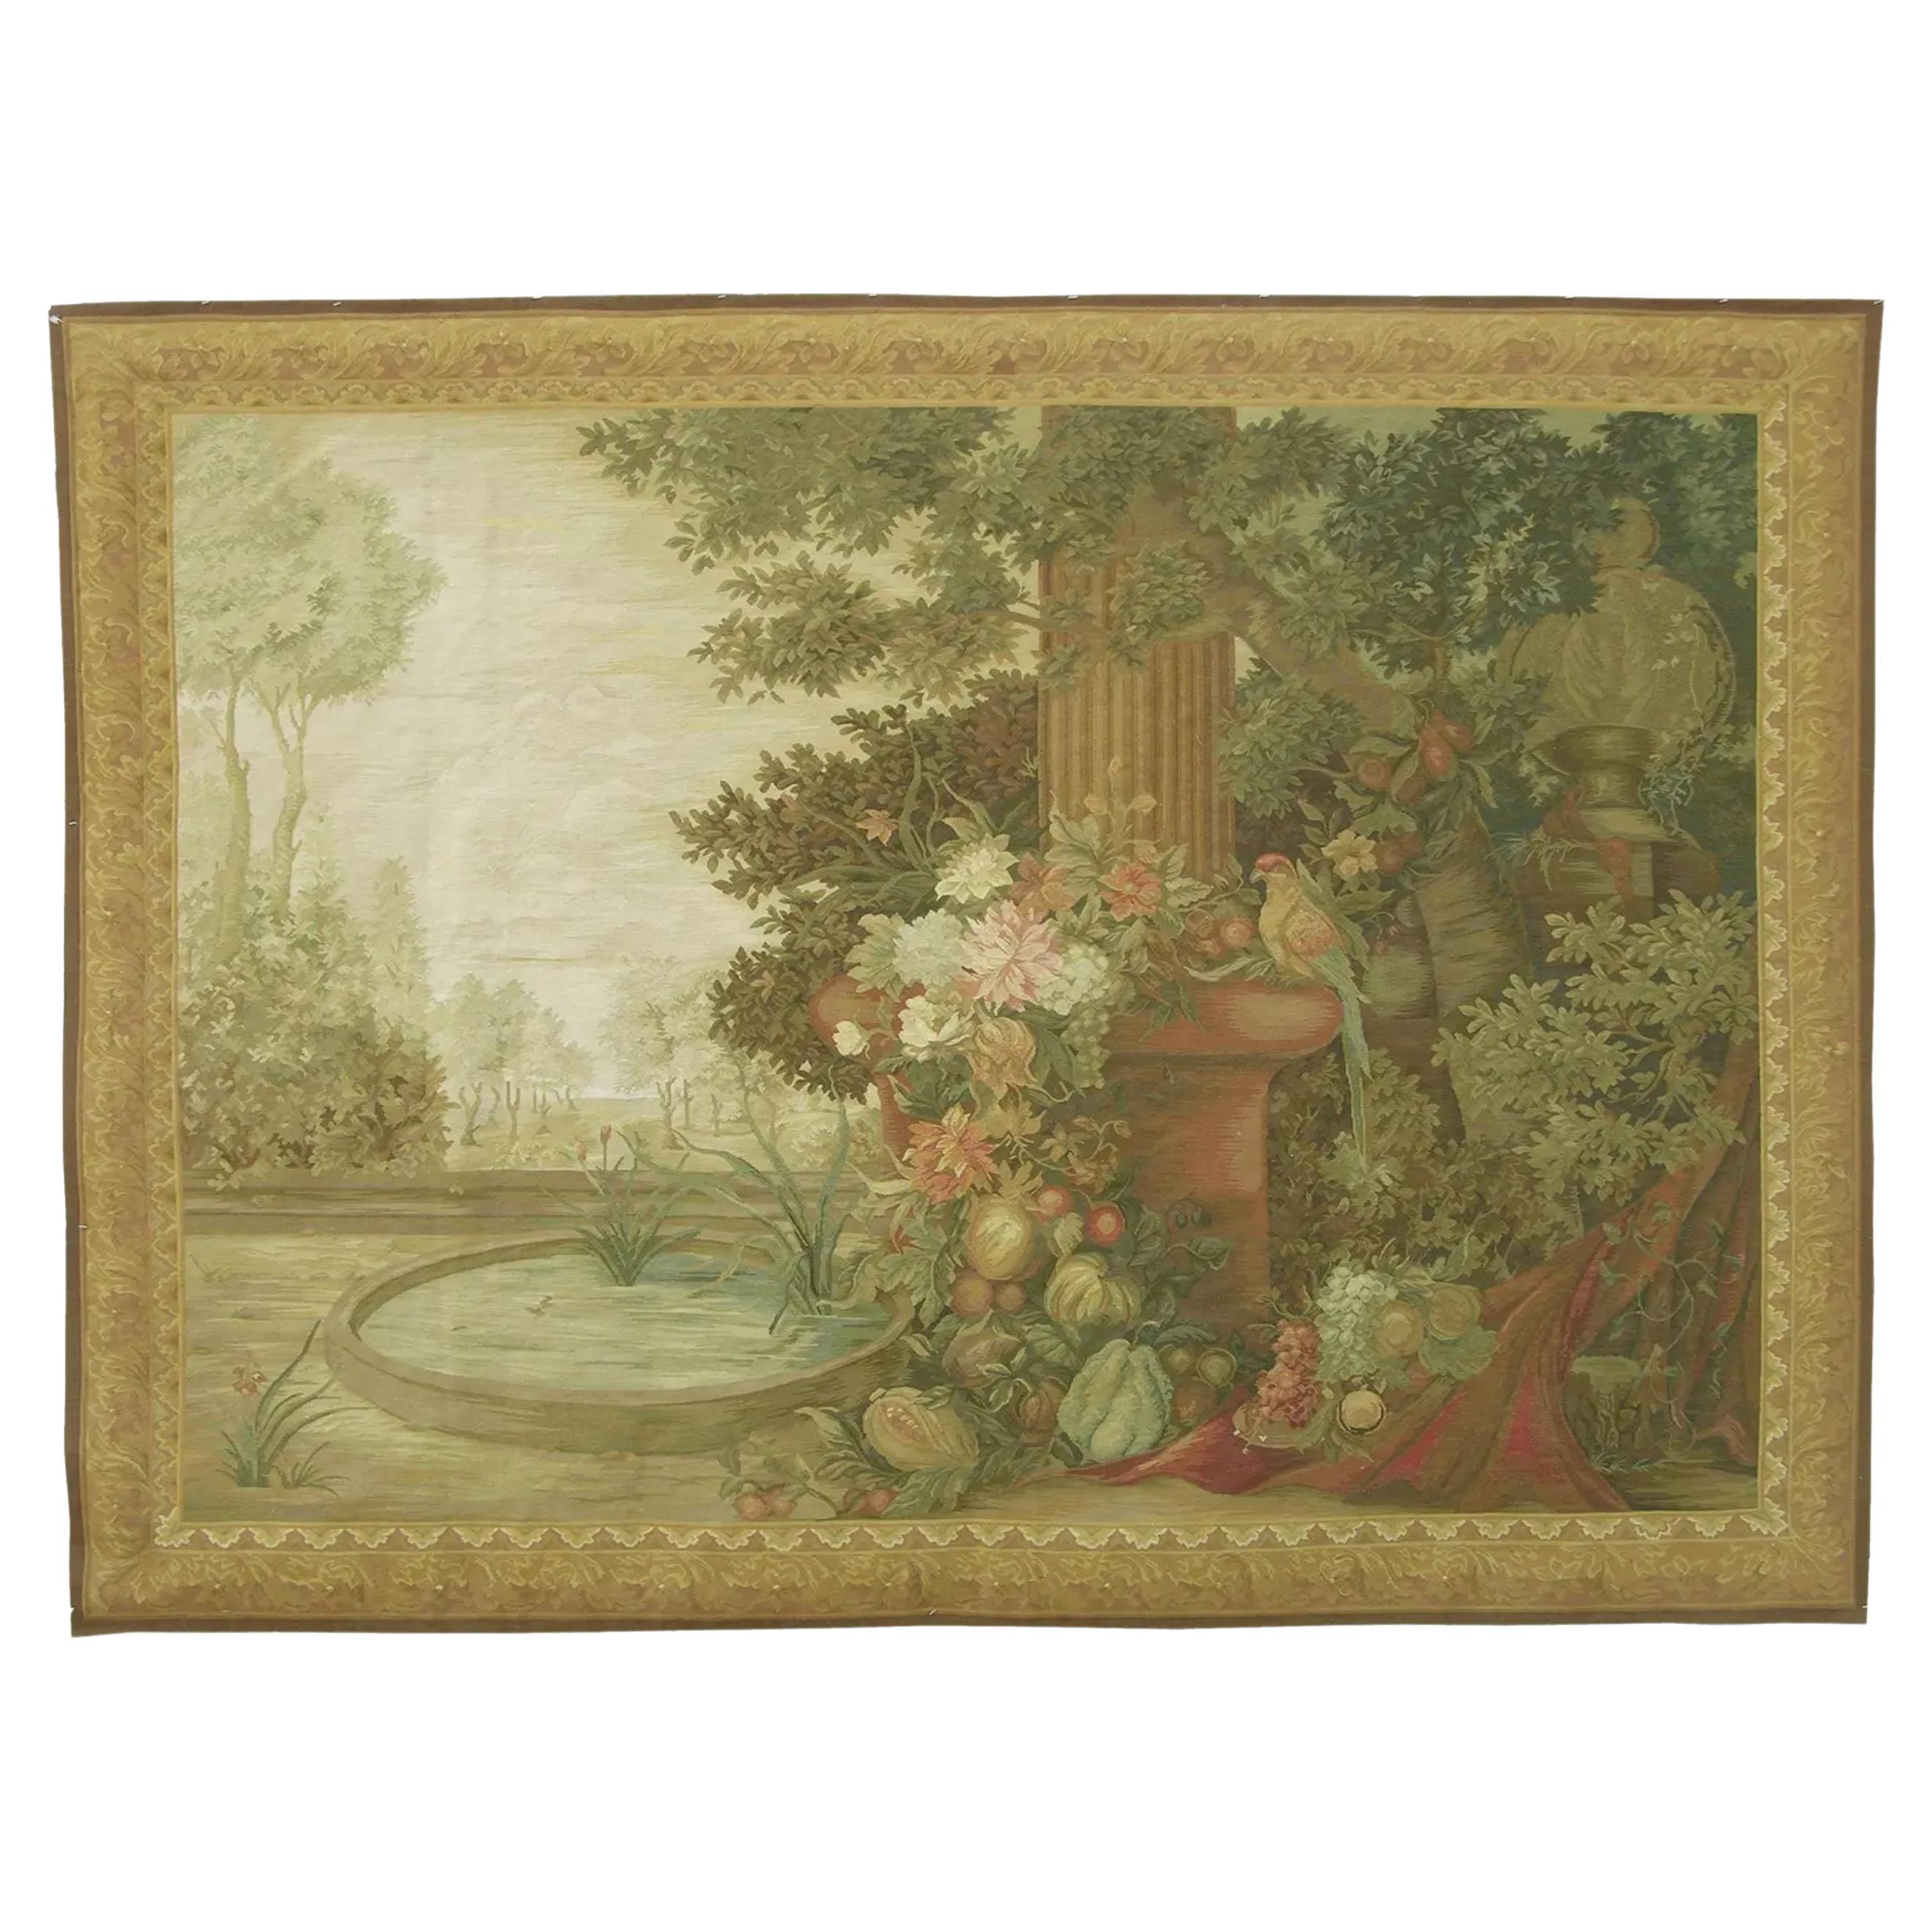 Vintage Woven Floral Scene Tapestry 7.7X5.7 For Sale